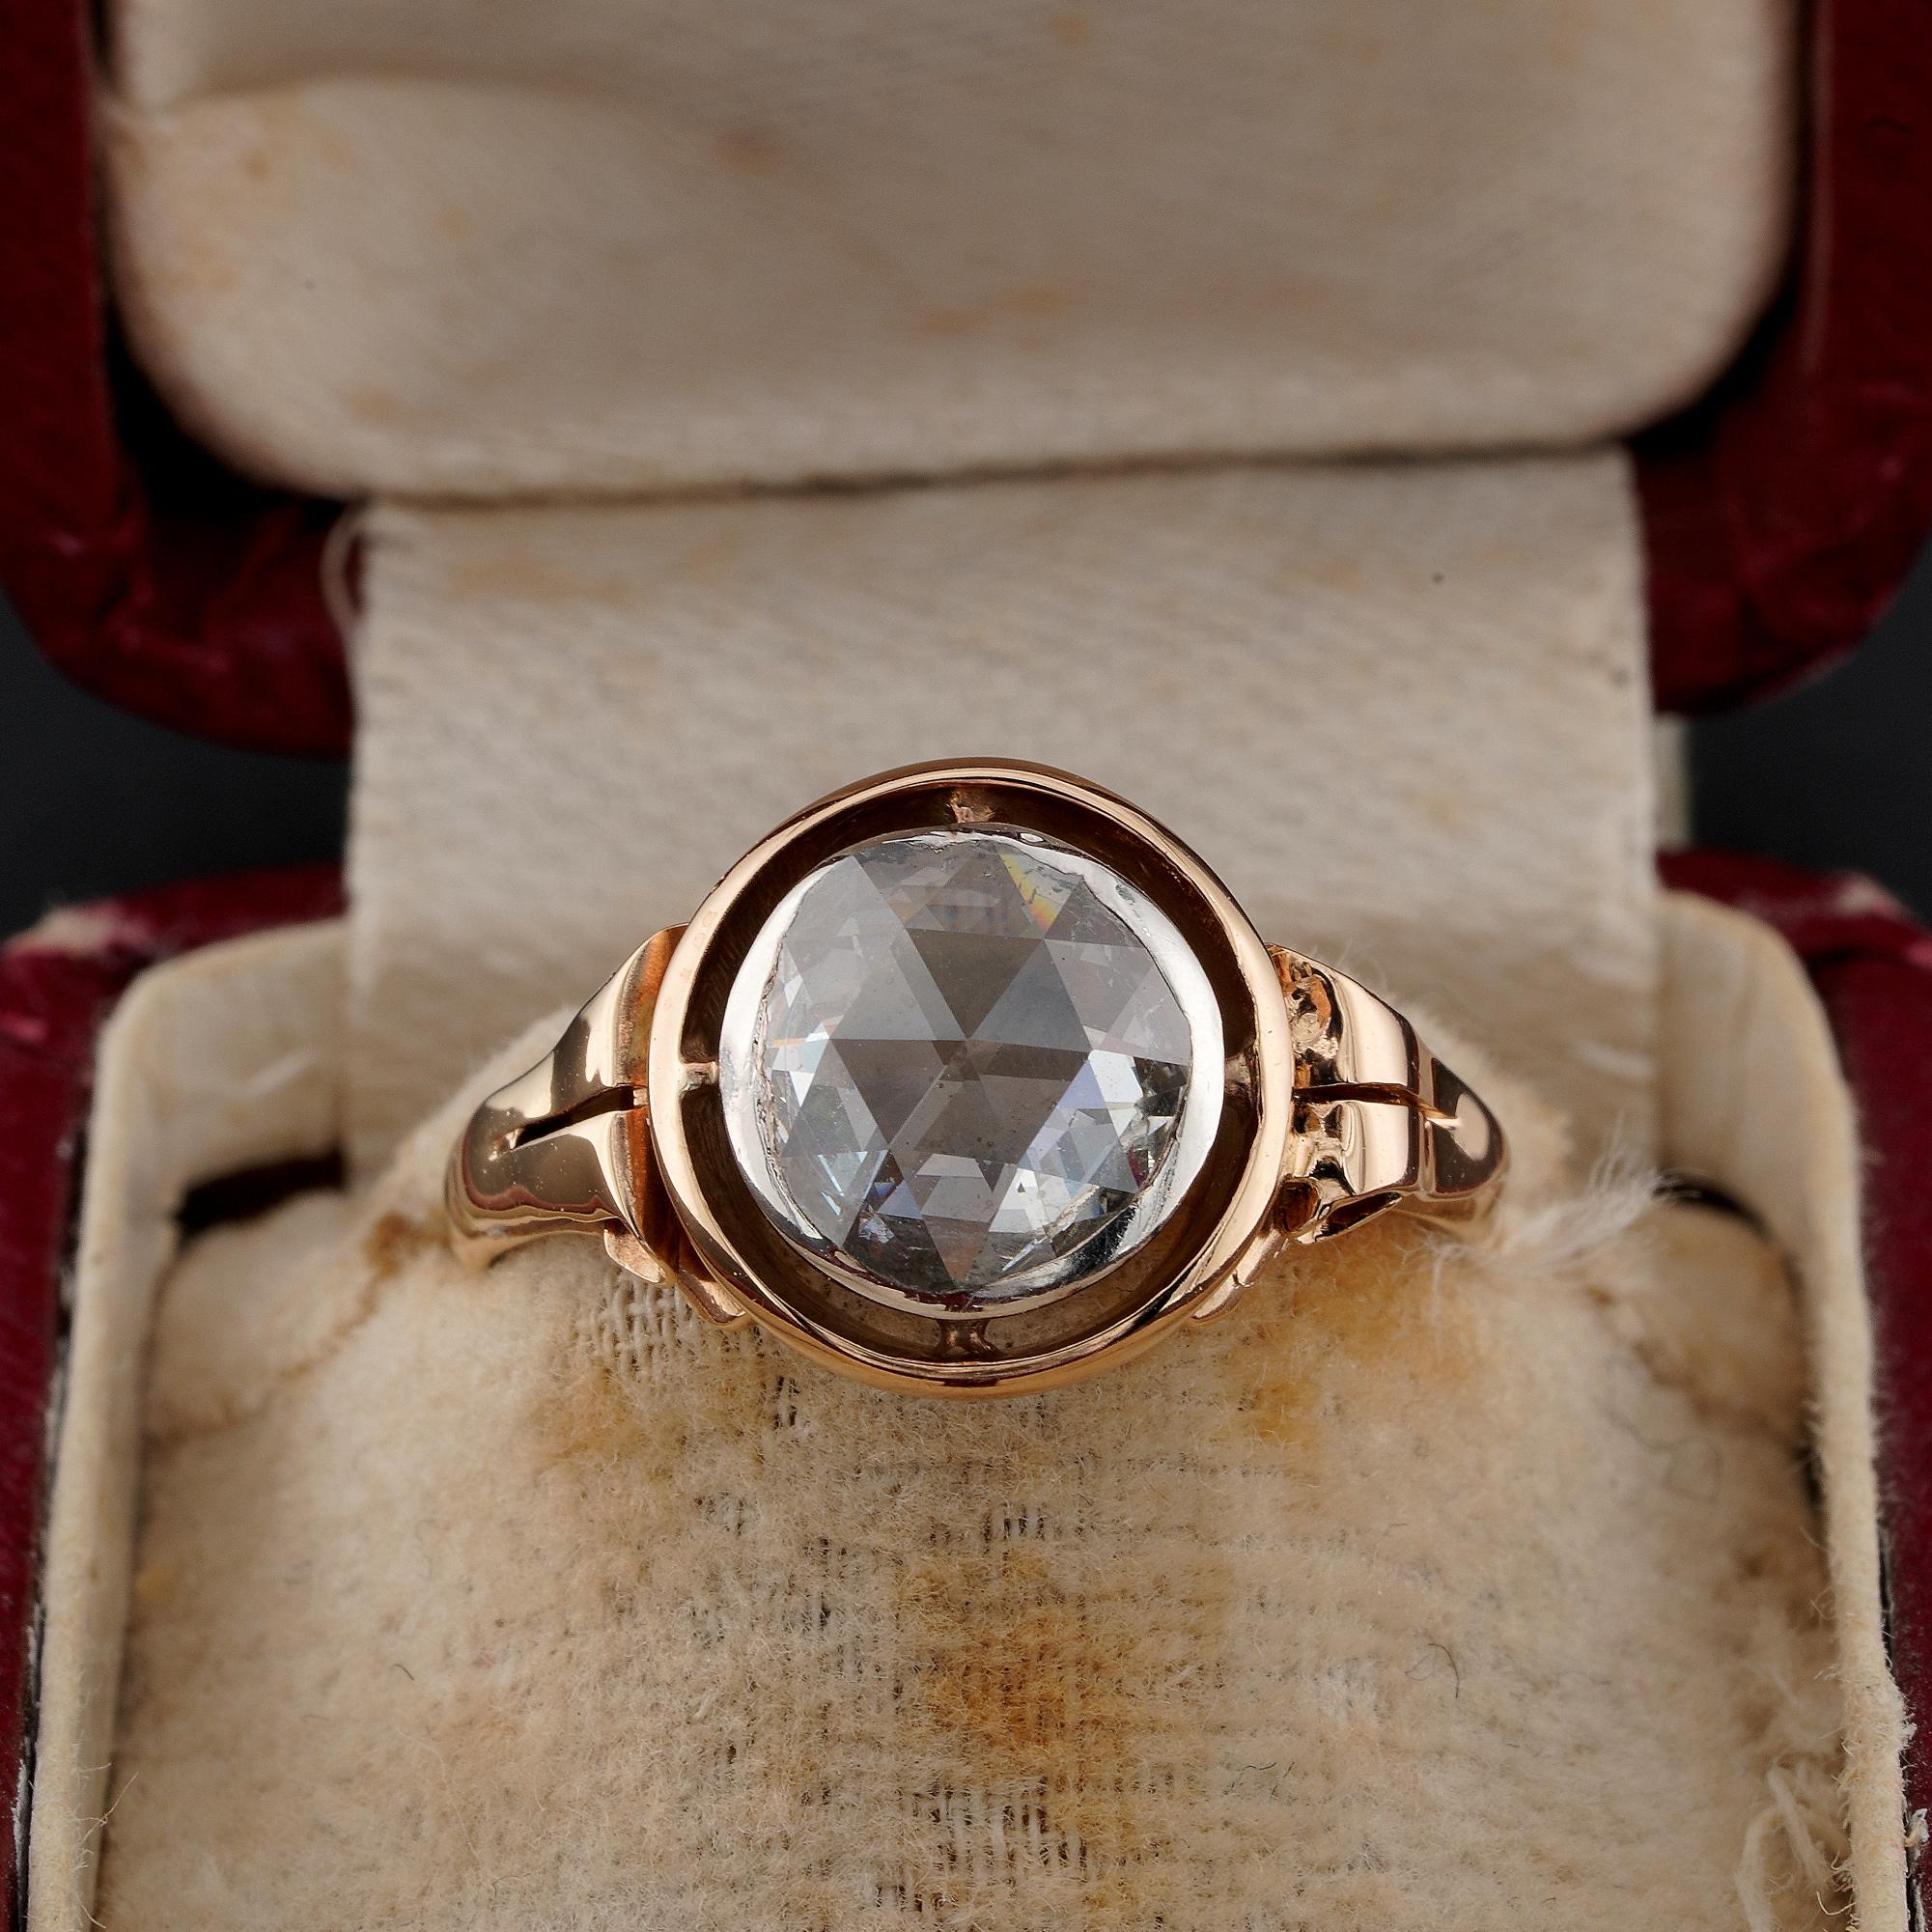 Rose Cut Diamond in Target
This beautiful antique ring is Victorian period, 1890/1900 ca
Designed as solitaire with lovely mounting entirely hand crafted of solid 18 KT gold , marked
Crown is made with the typical Target motif encircling the main